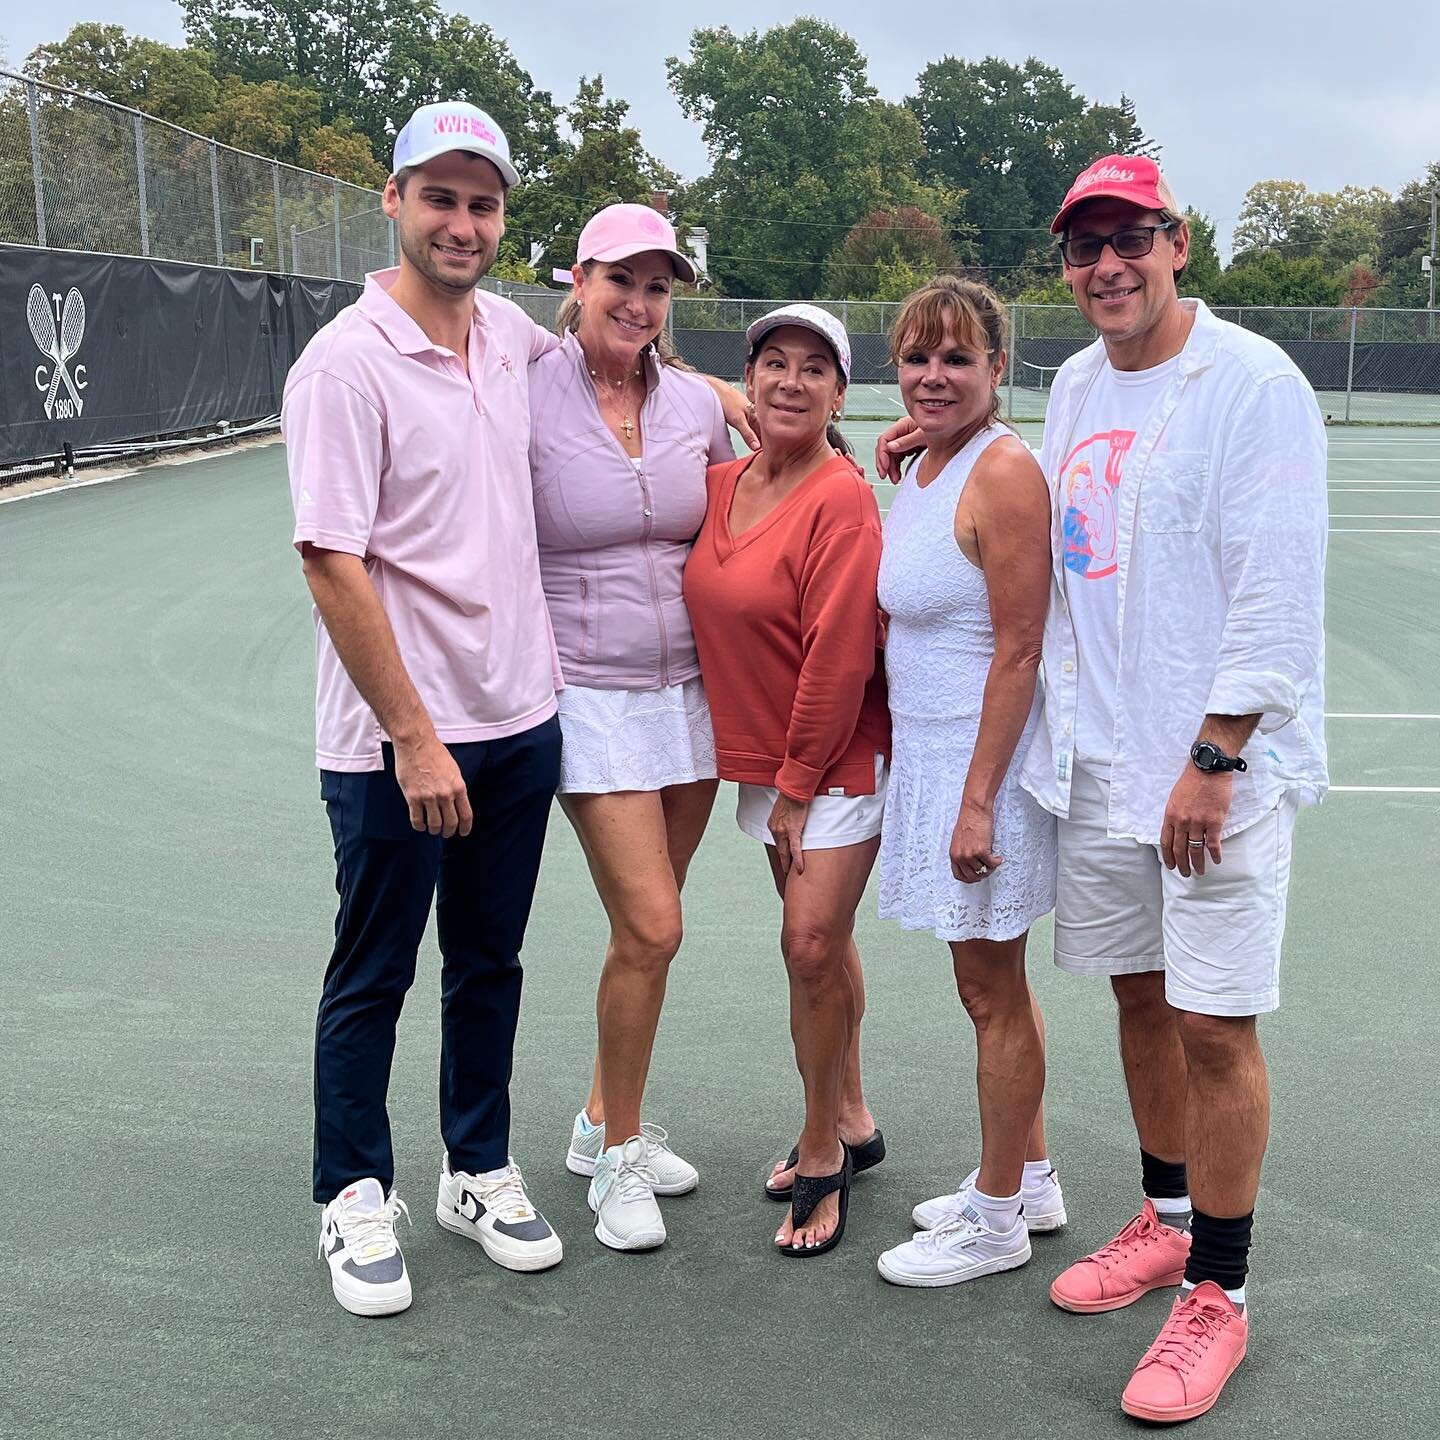 Fabulous morning at the Club with @kwfliving celebrating life and getting some FUN on the calendar. And yeah the Wellingtons do look good in white. 🤍🎾💕